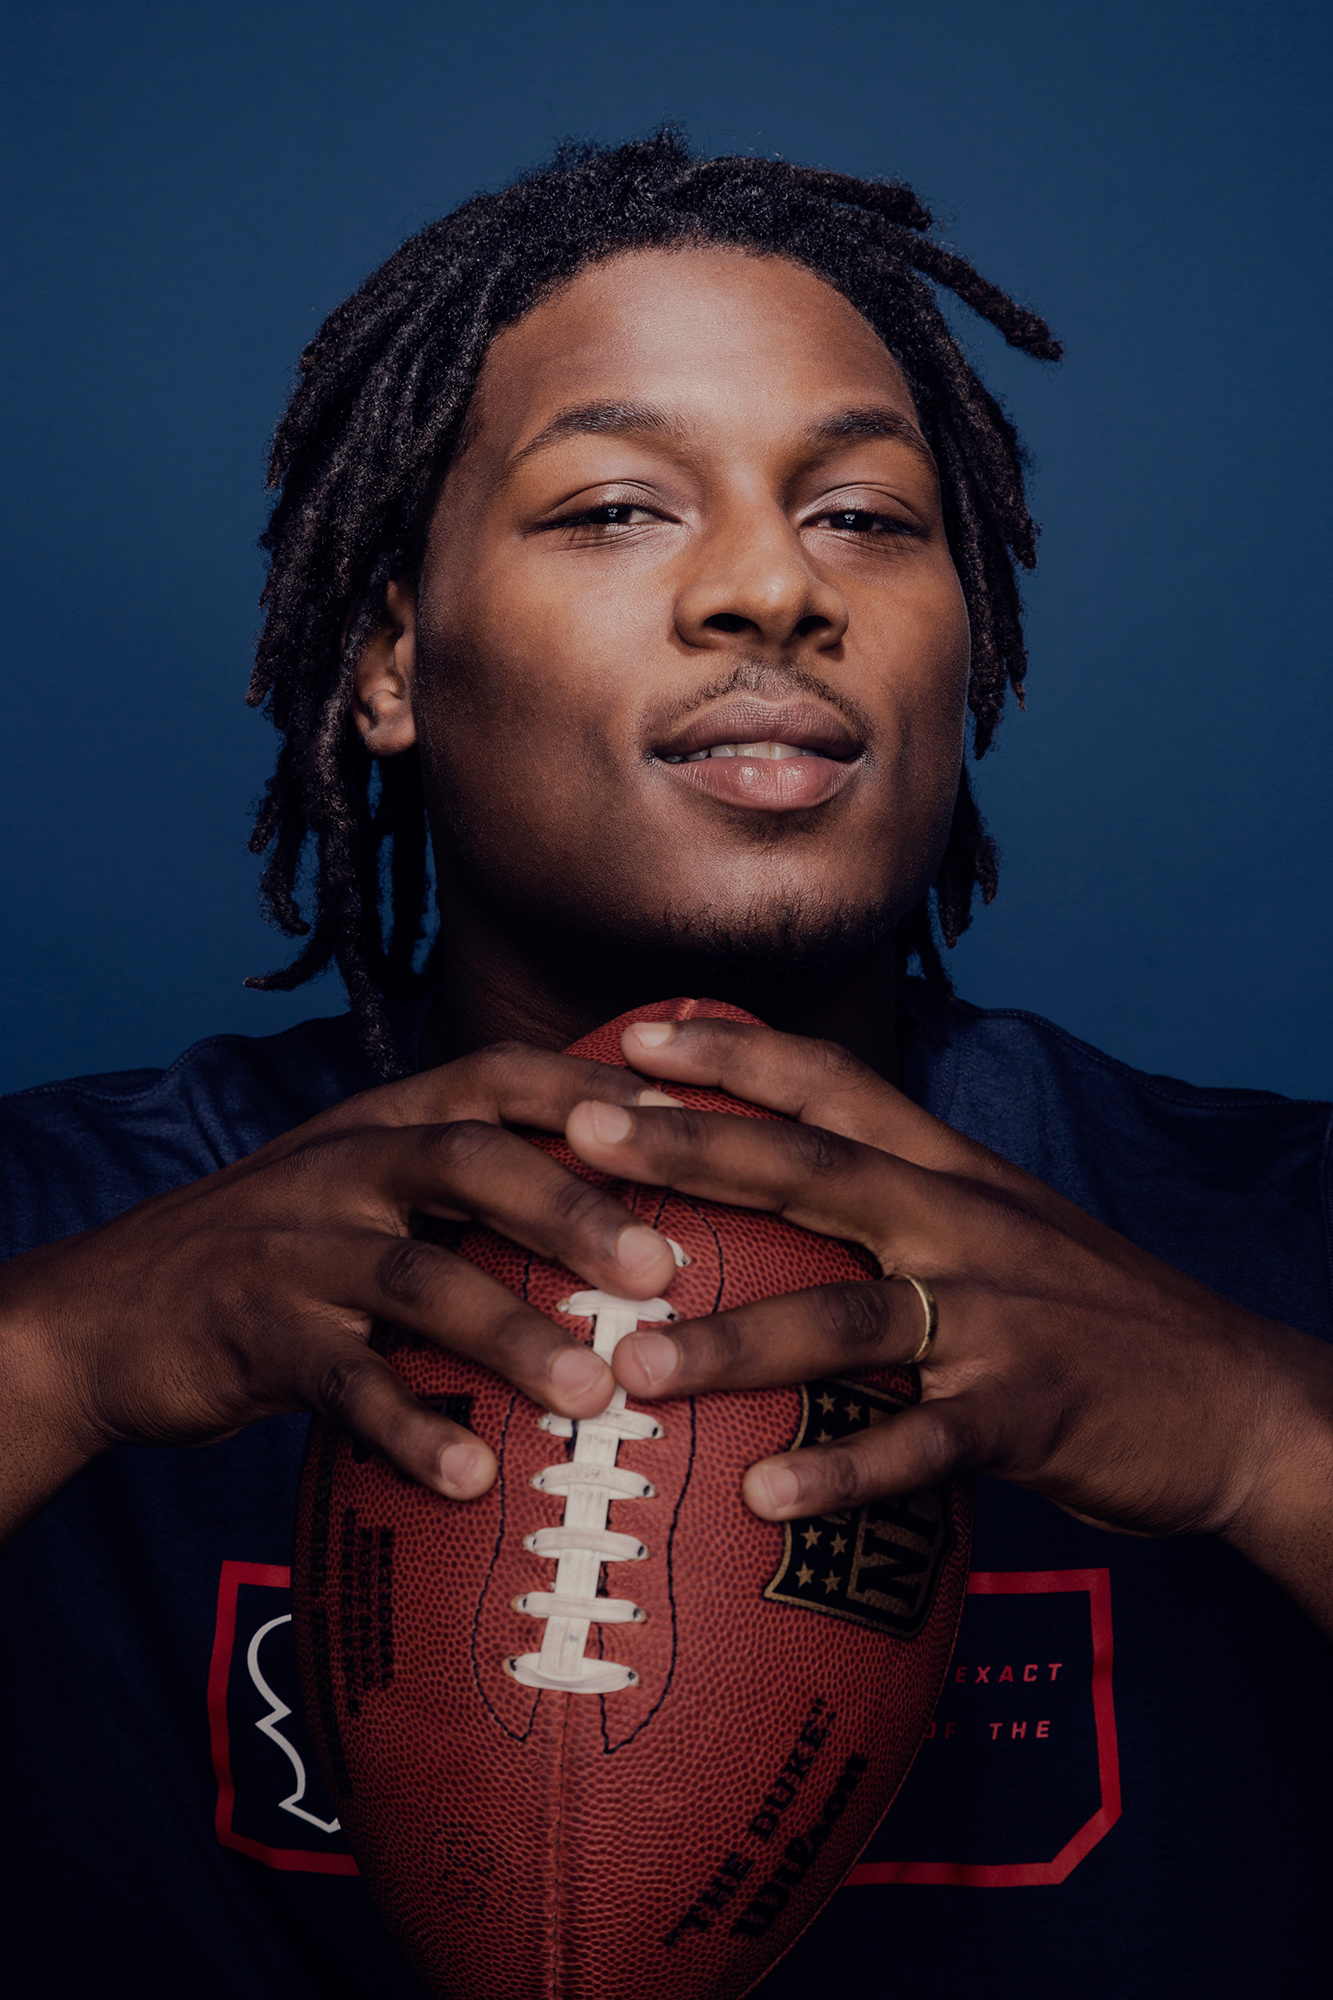 Lonnie Ballentine, Houston Texas NFL player, photographed for the cover of Southwest The Magazine by Houston editorial photographer, Todd Spoth.